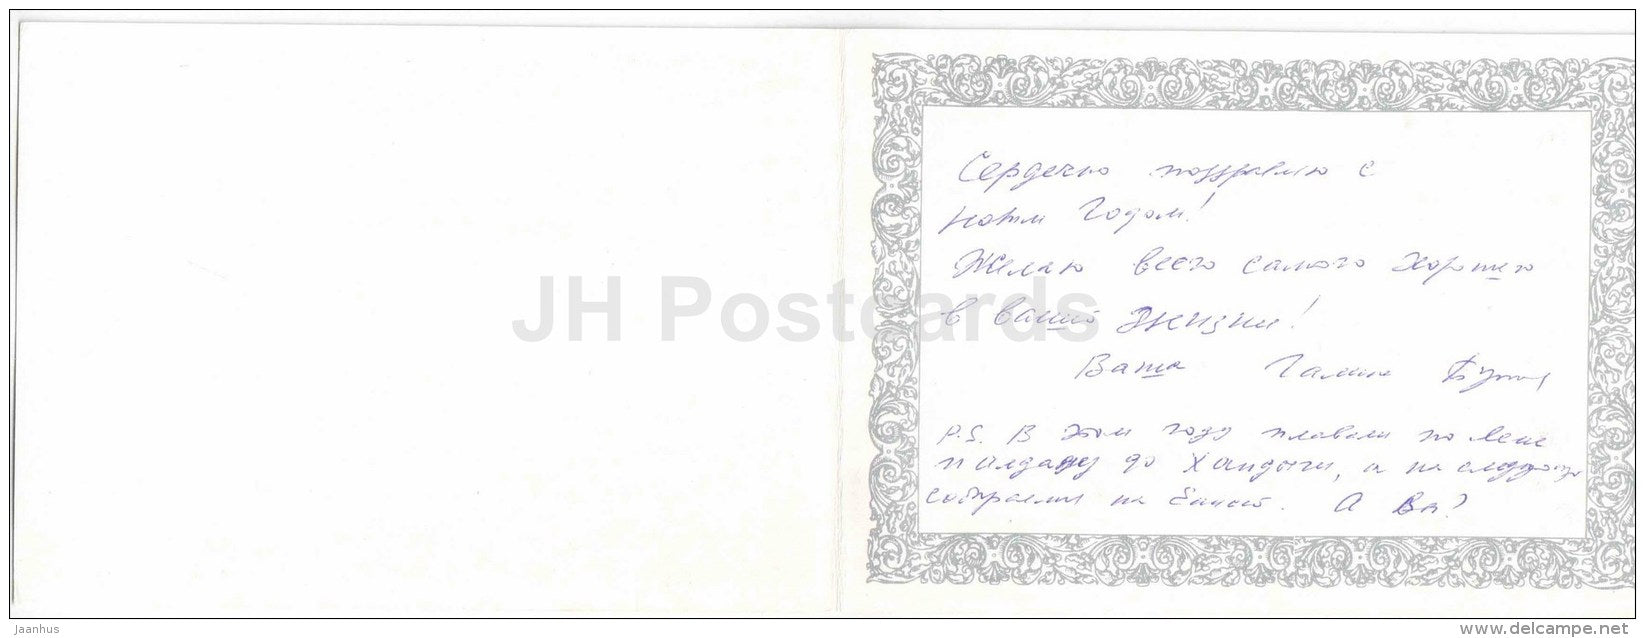 New Year greeting card by M. Zanegin - library - 1976 - Russia USSR - used - JH Postcards